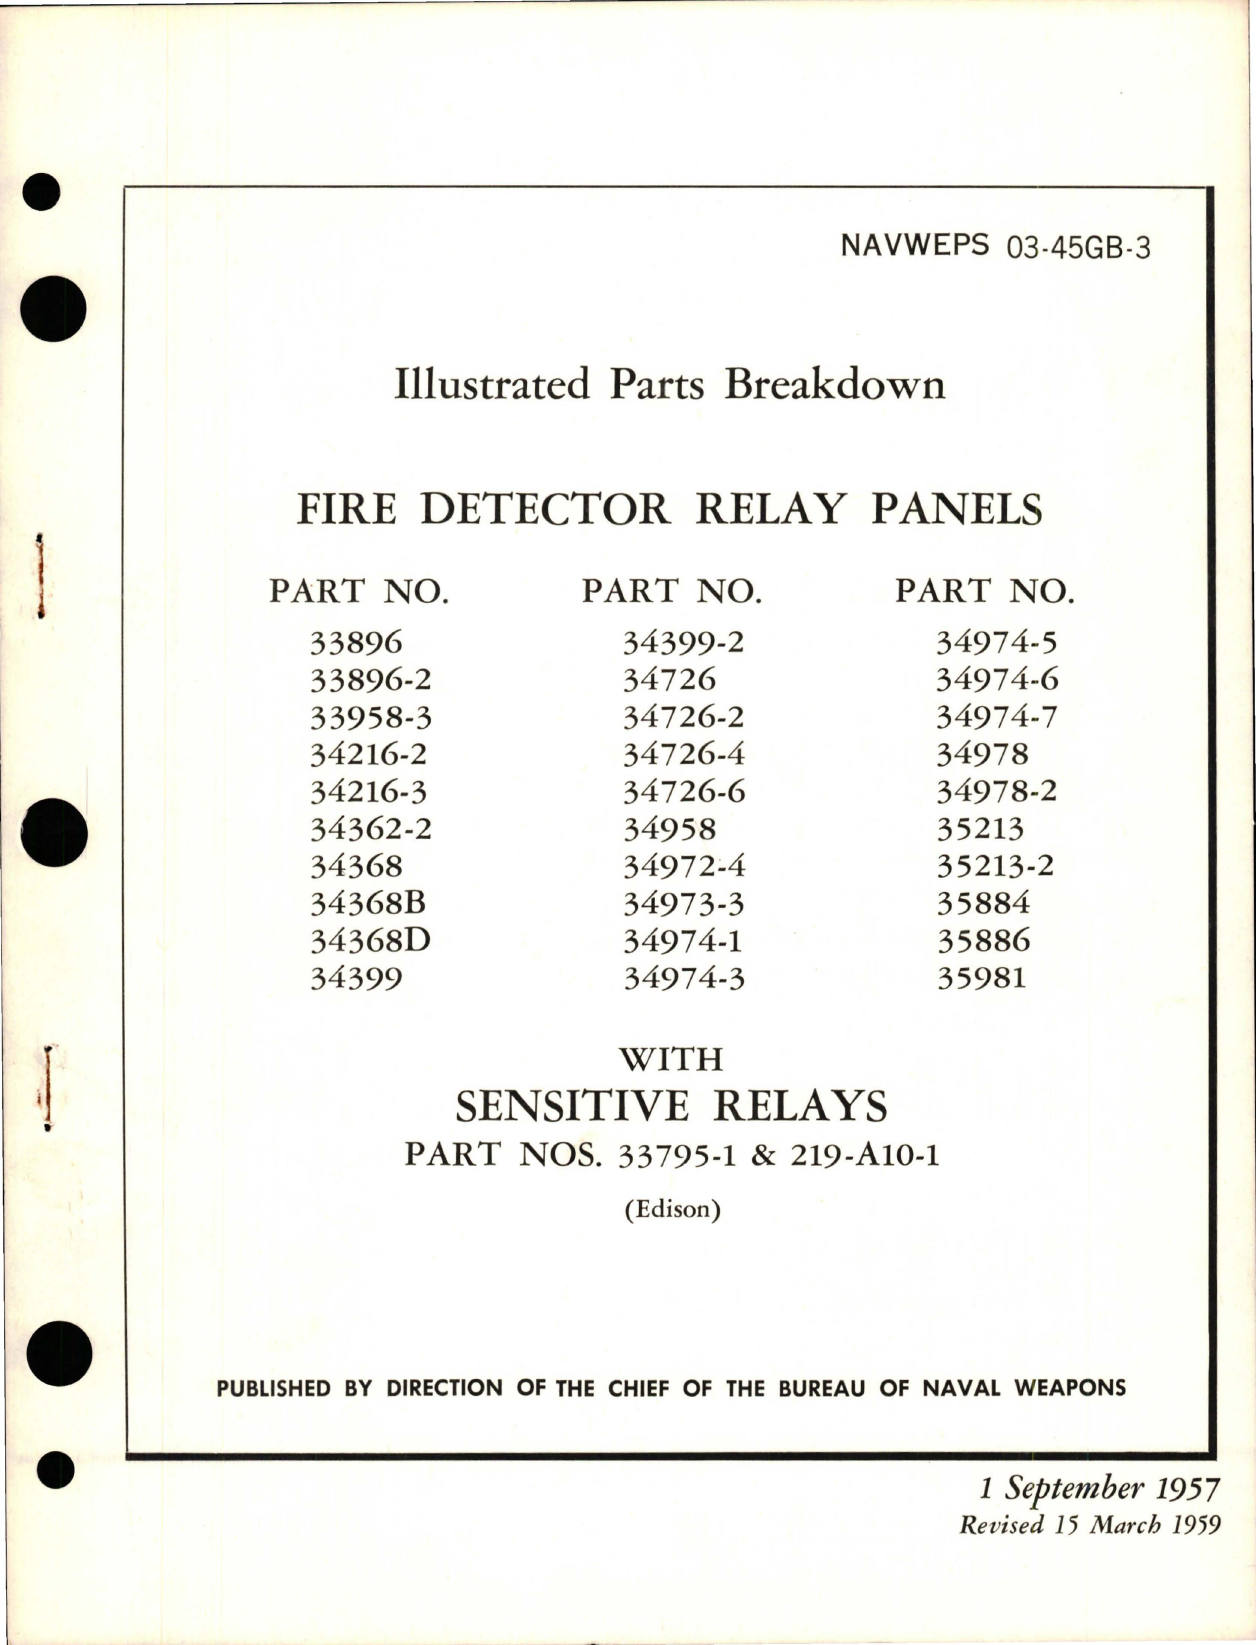 Sample page 1 from AirCorps Library document: Illustrated Parts Breakdown for Fire Detector Relay Panels with Sensitive Relays